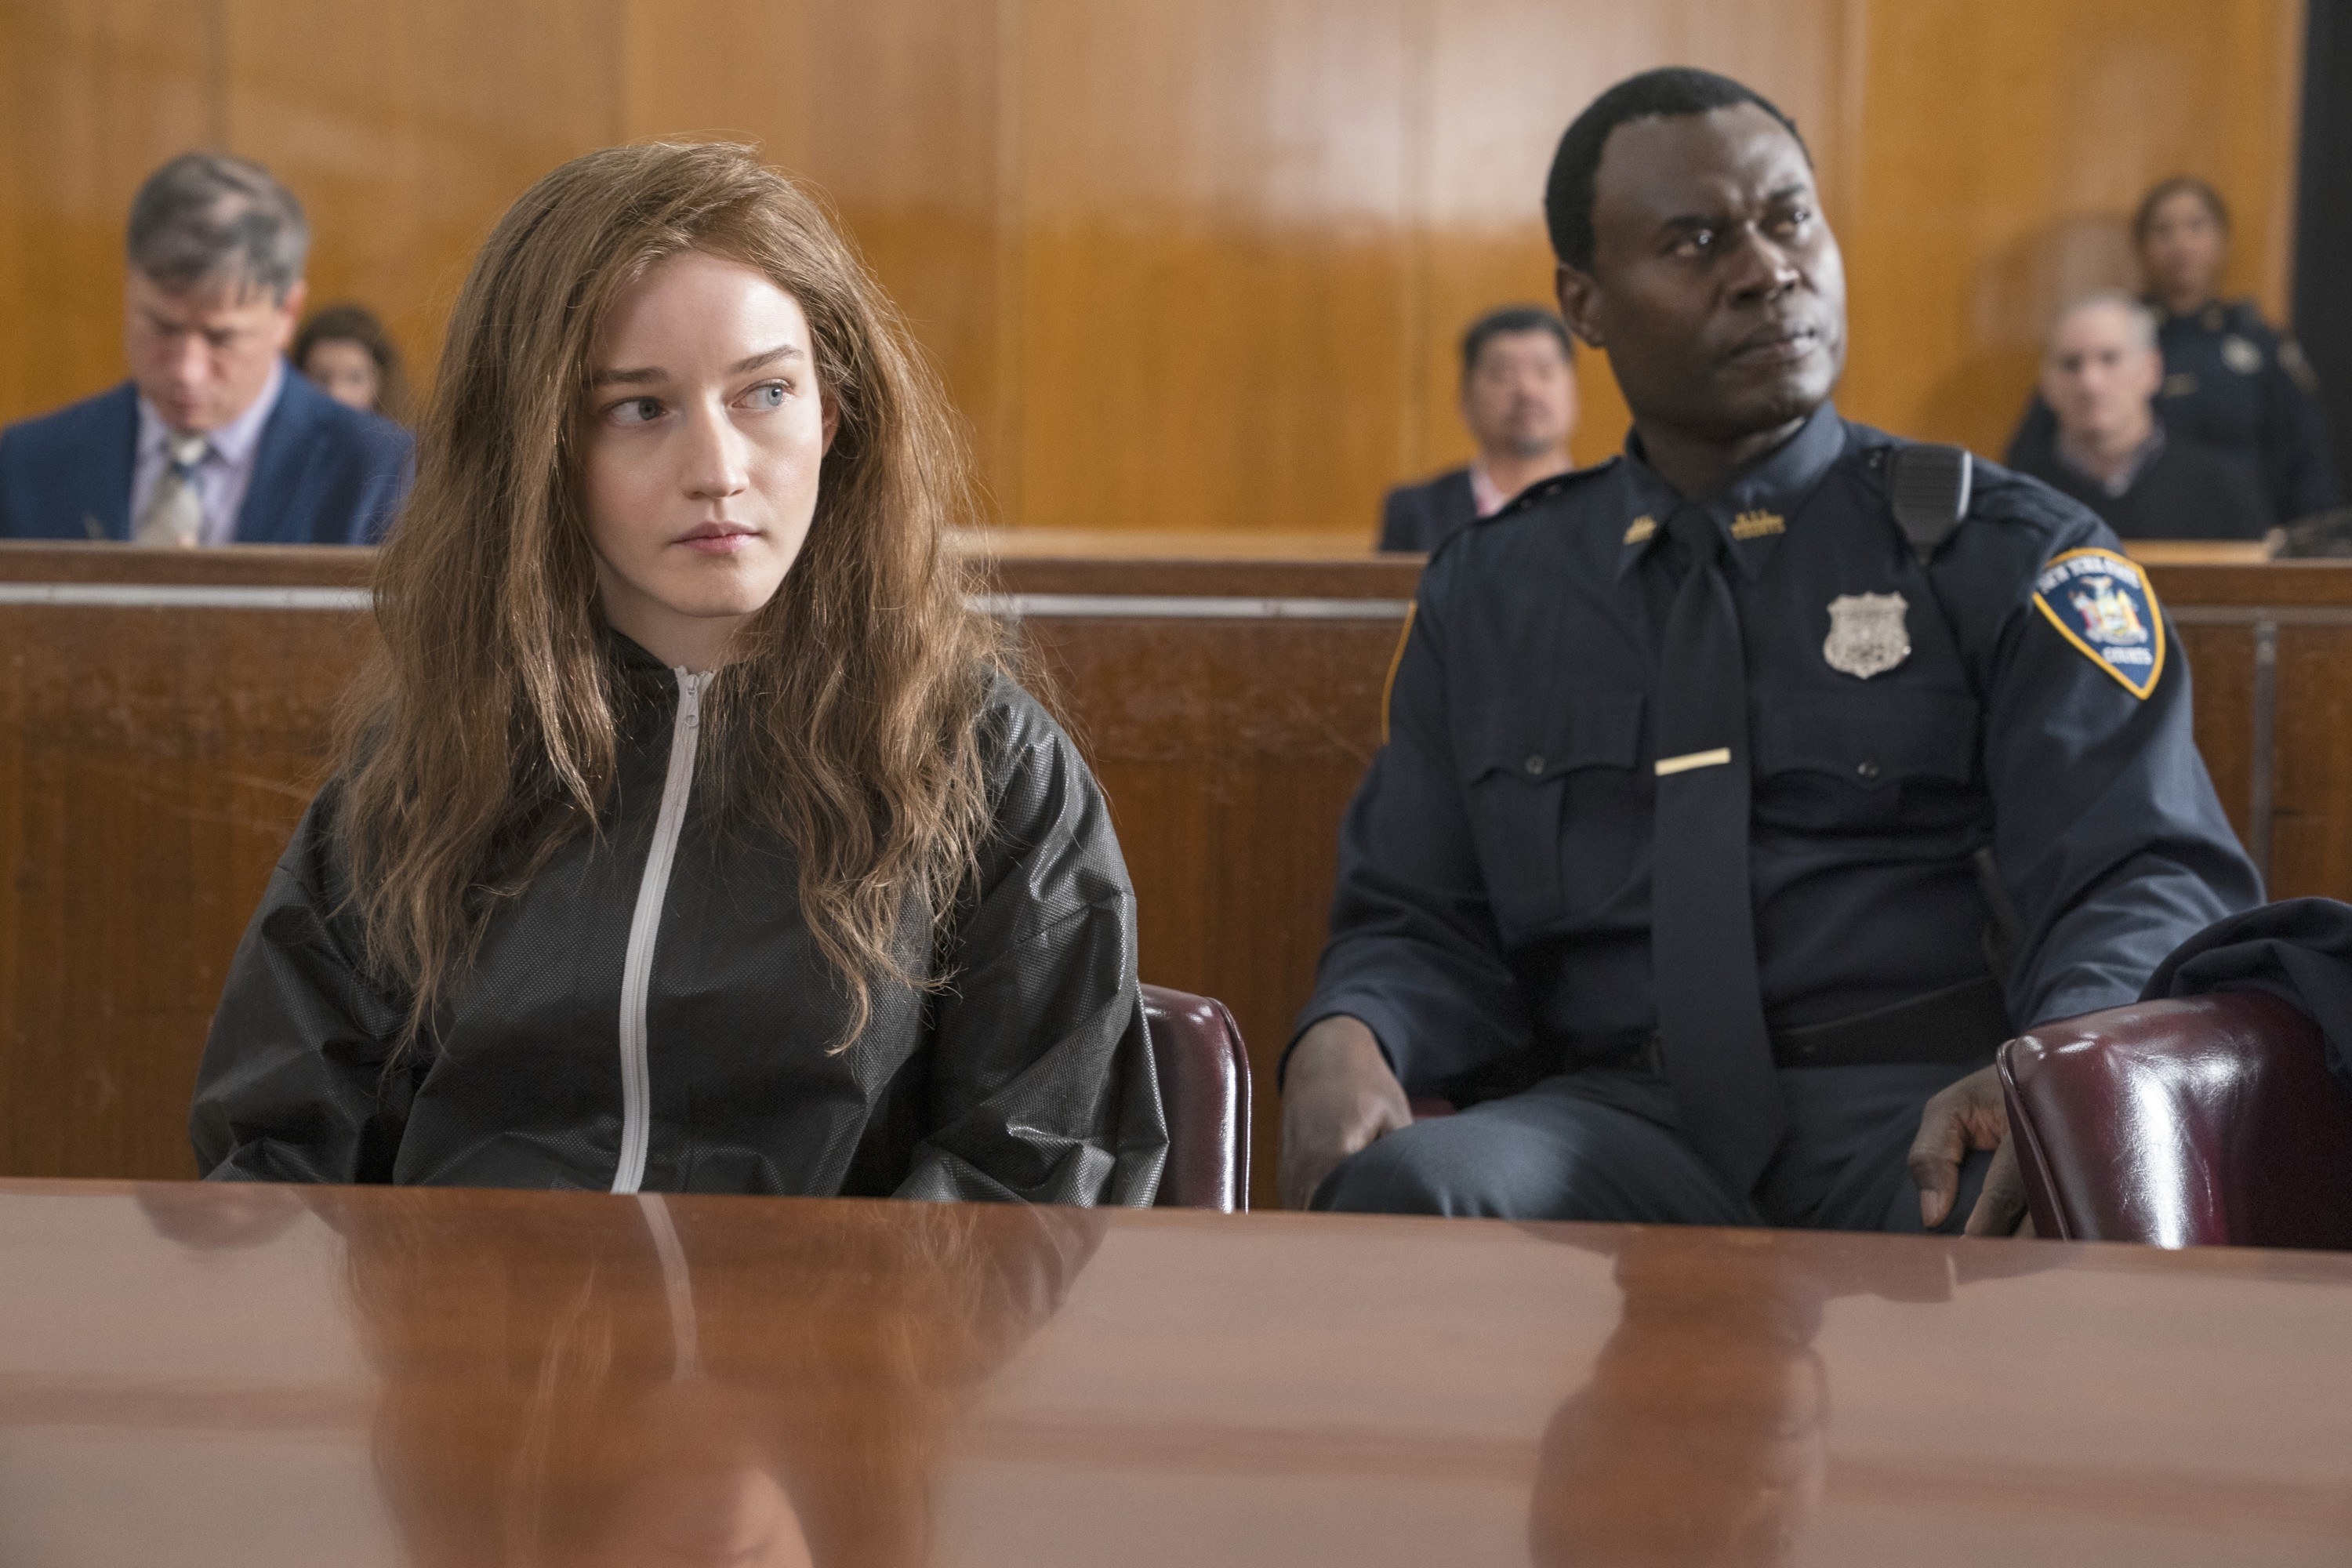 dressed in a zipped-up jacket with messy hair, Anna sits next to a guard in court